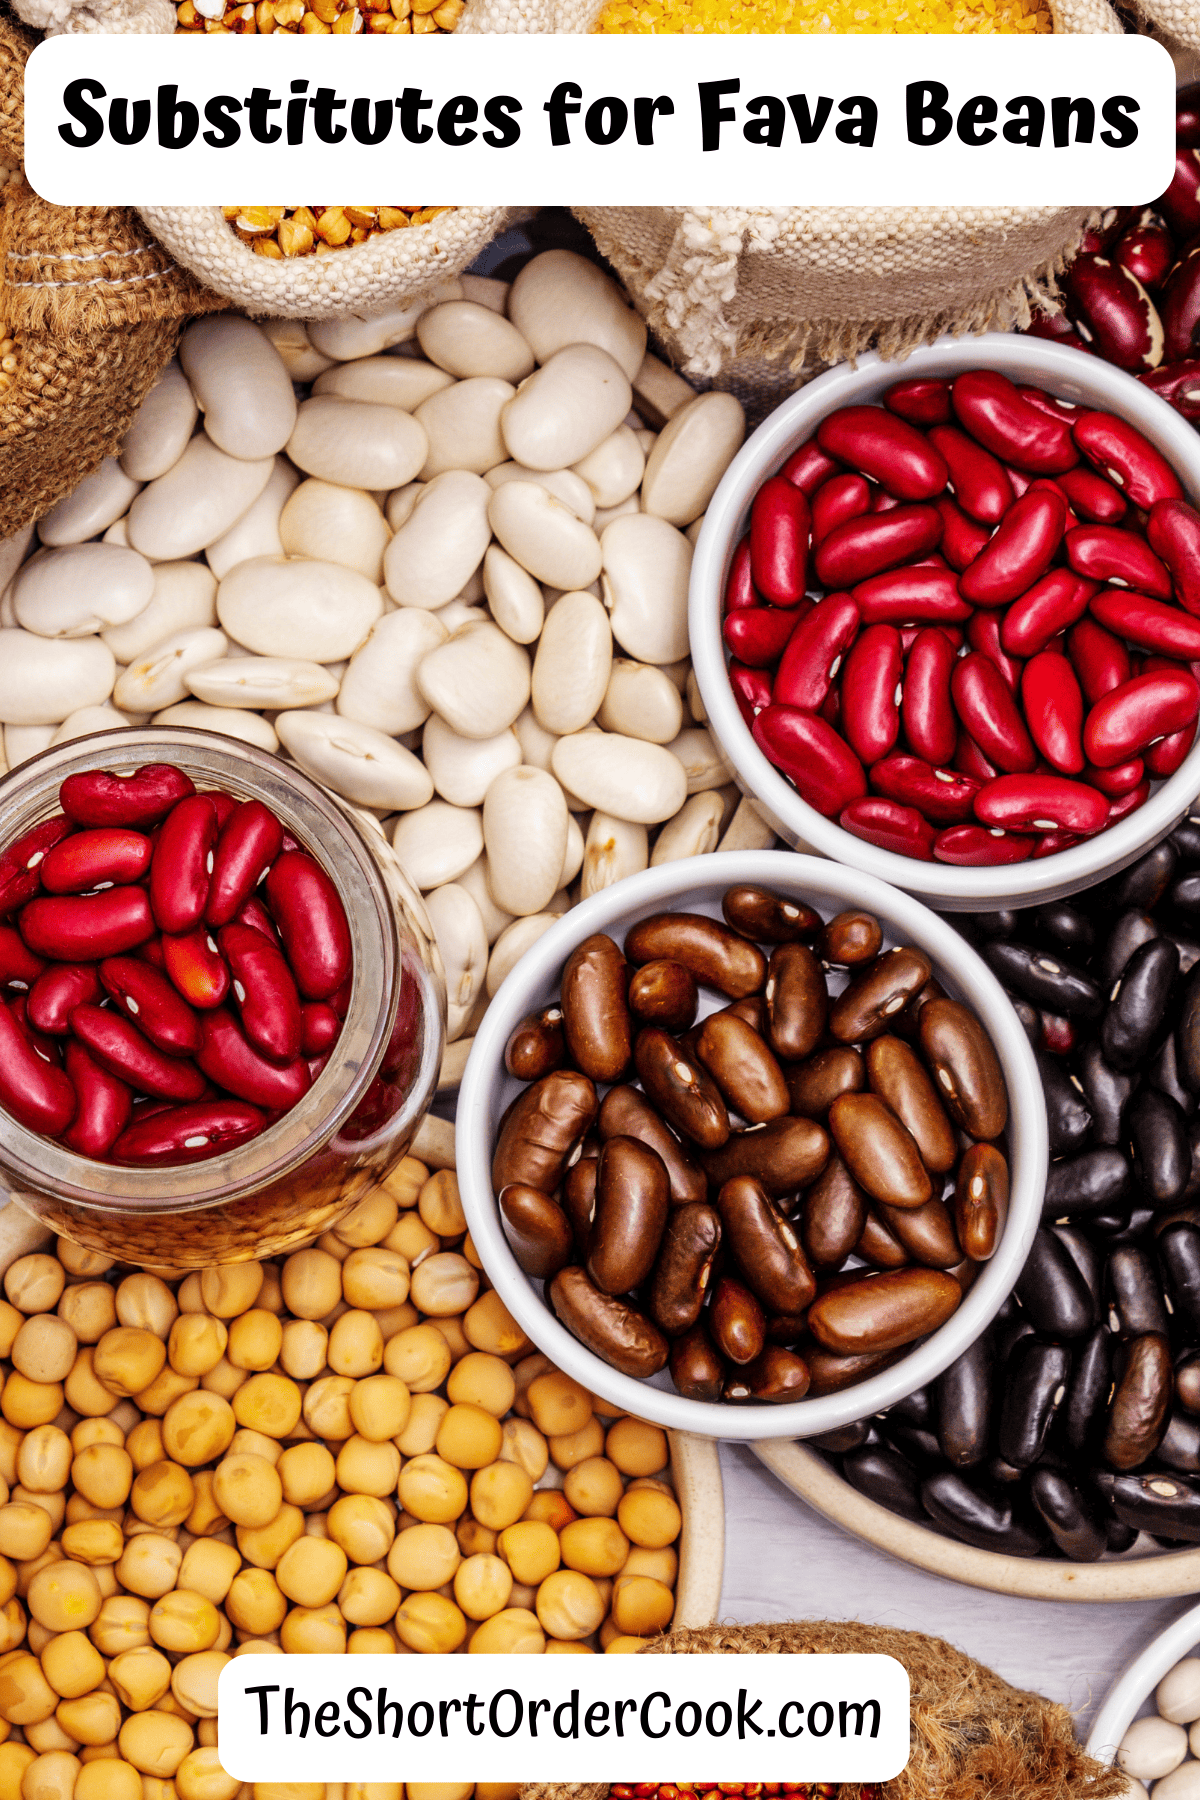 Many different kinds of dried beans that can be used as a substitute for favas, fabas, broad beans, or horse beans.